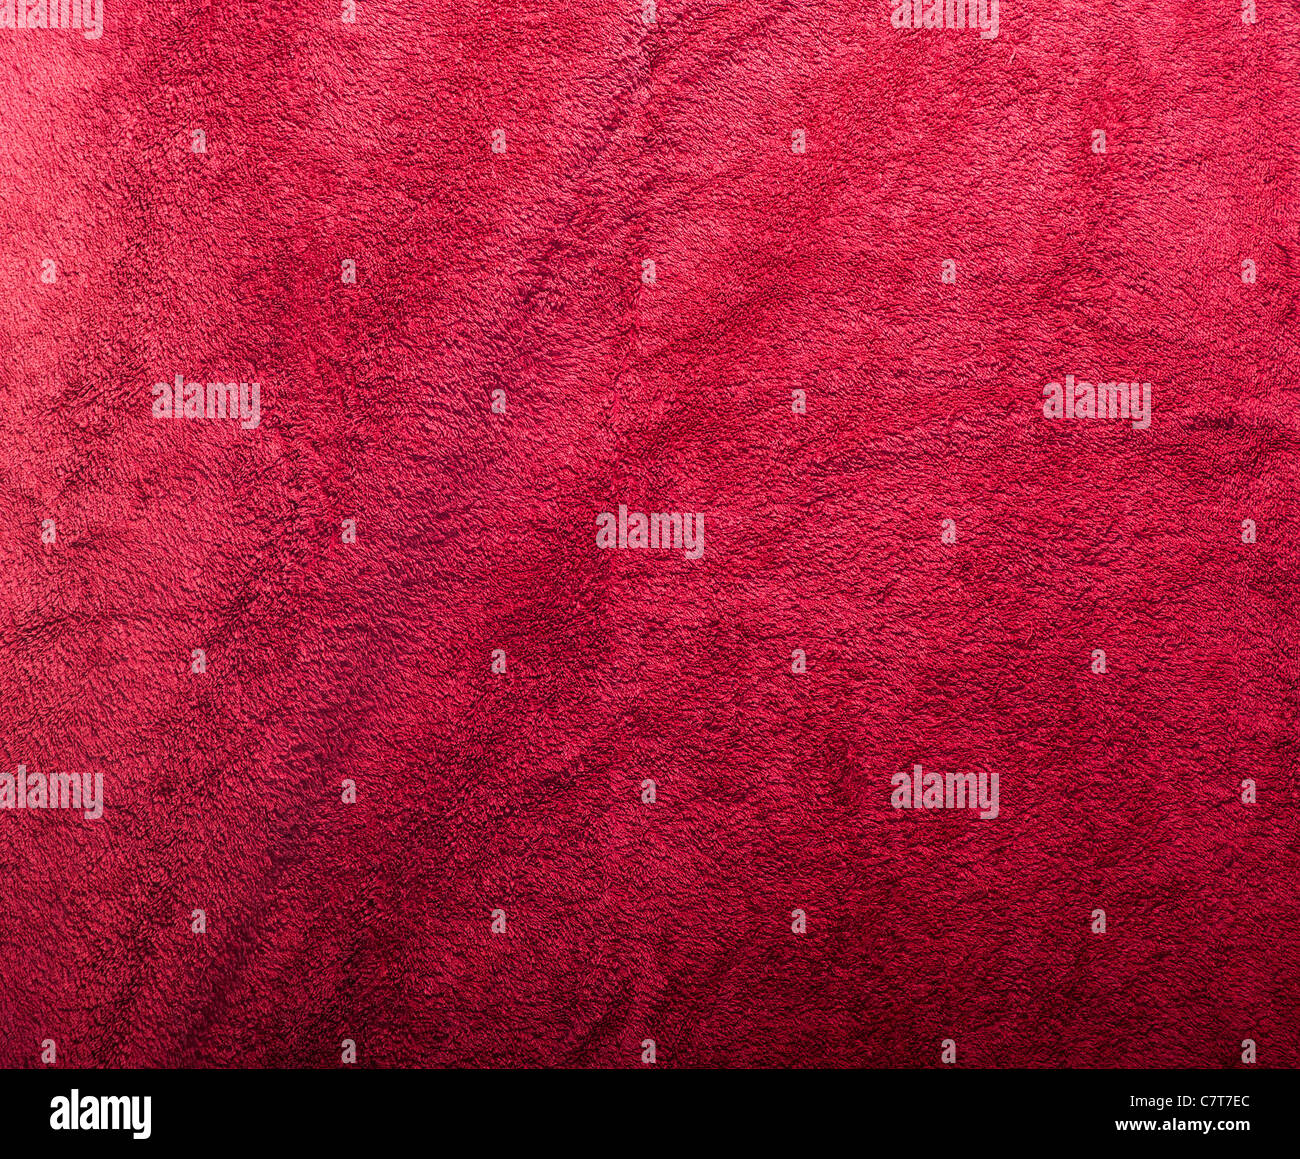 Plush red fabric texture in detail Stock Photo